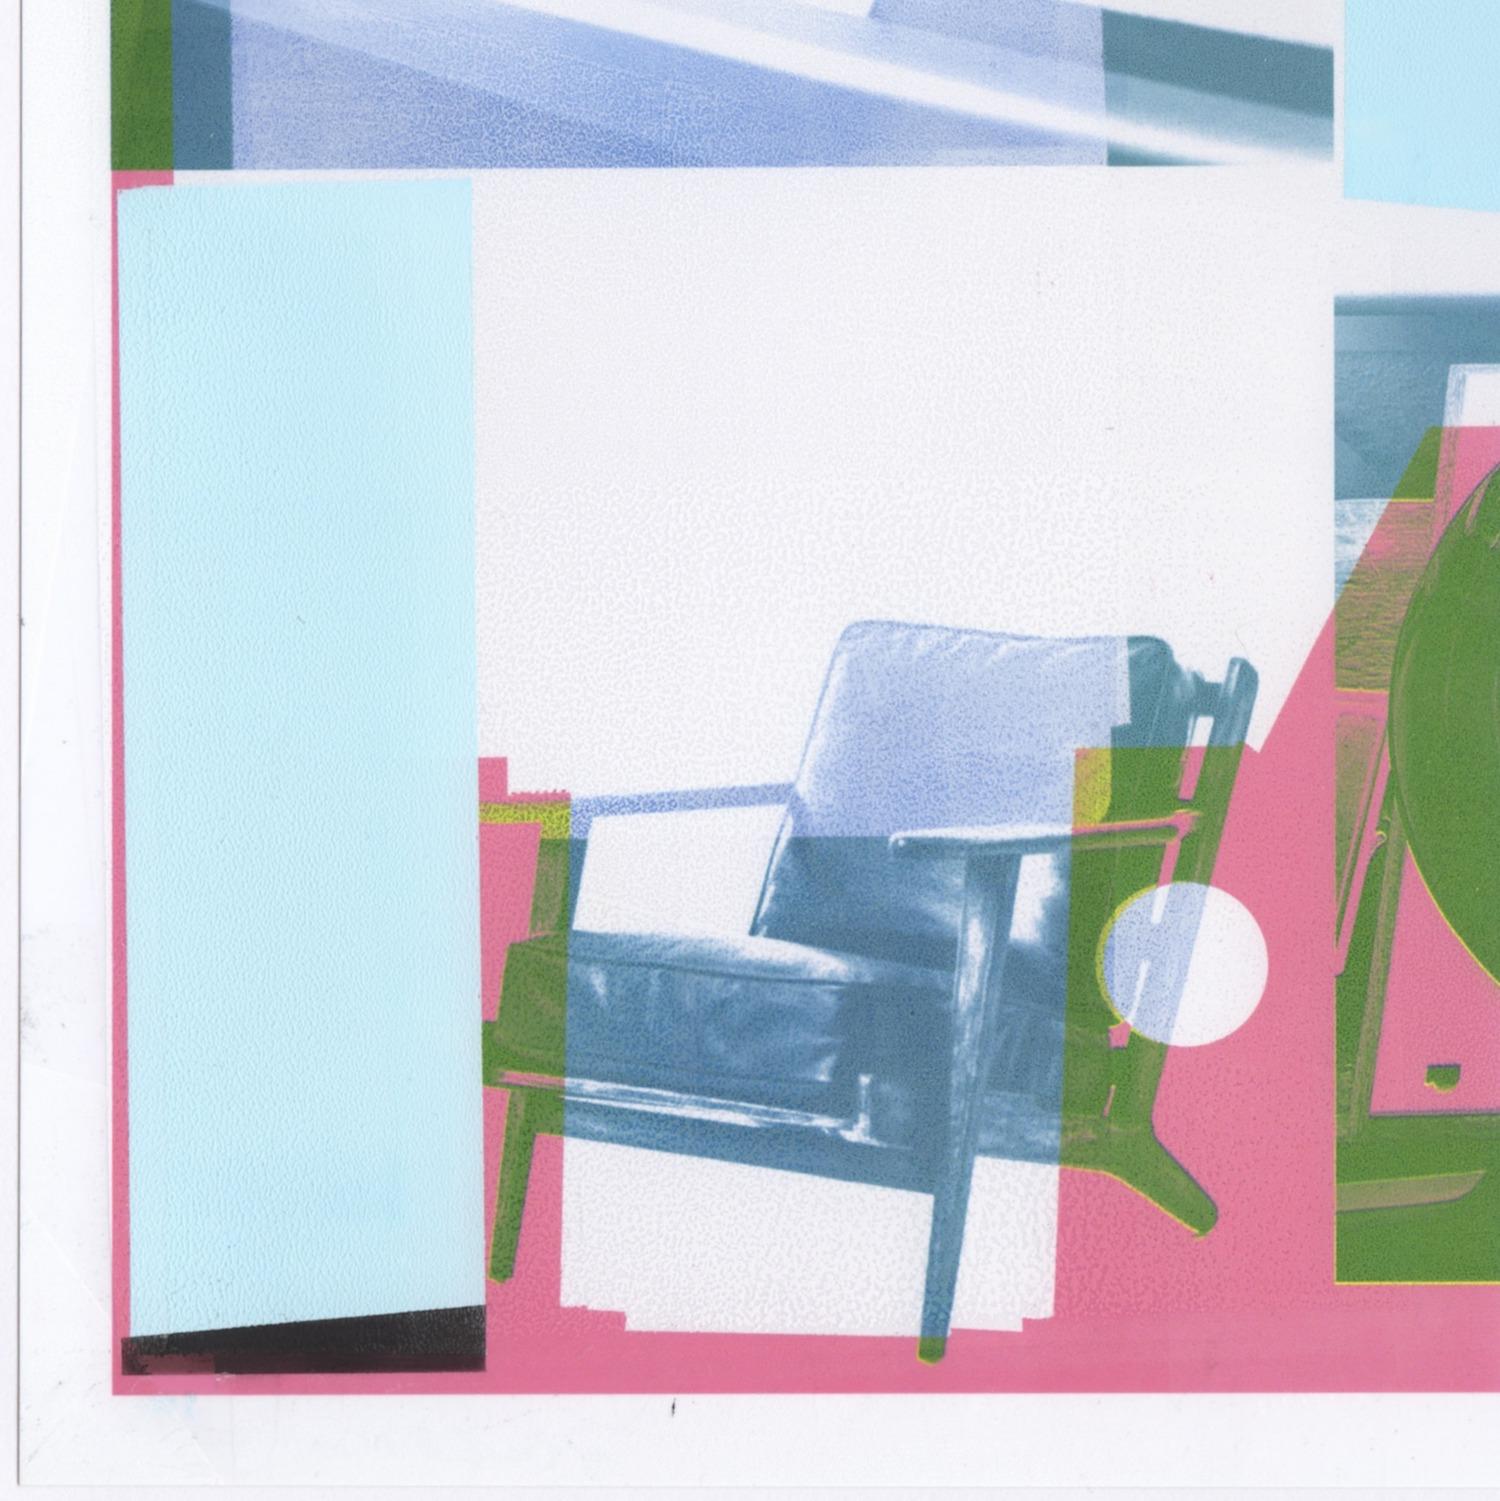 Deconstructed and cropped images of a turntable, a cassette tape, and a mid century modern chair are represented on 12 x 12 inch Red River photo paper in vivid hues of pink, blue and green in Patty deGrandpre’s contemporary abstract monoprint titled